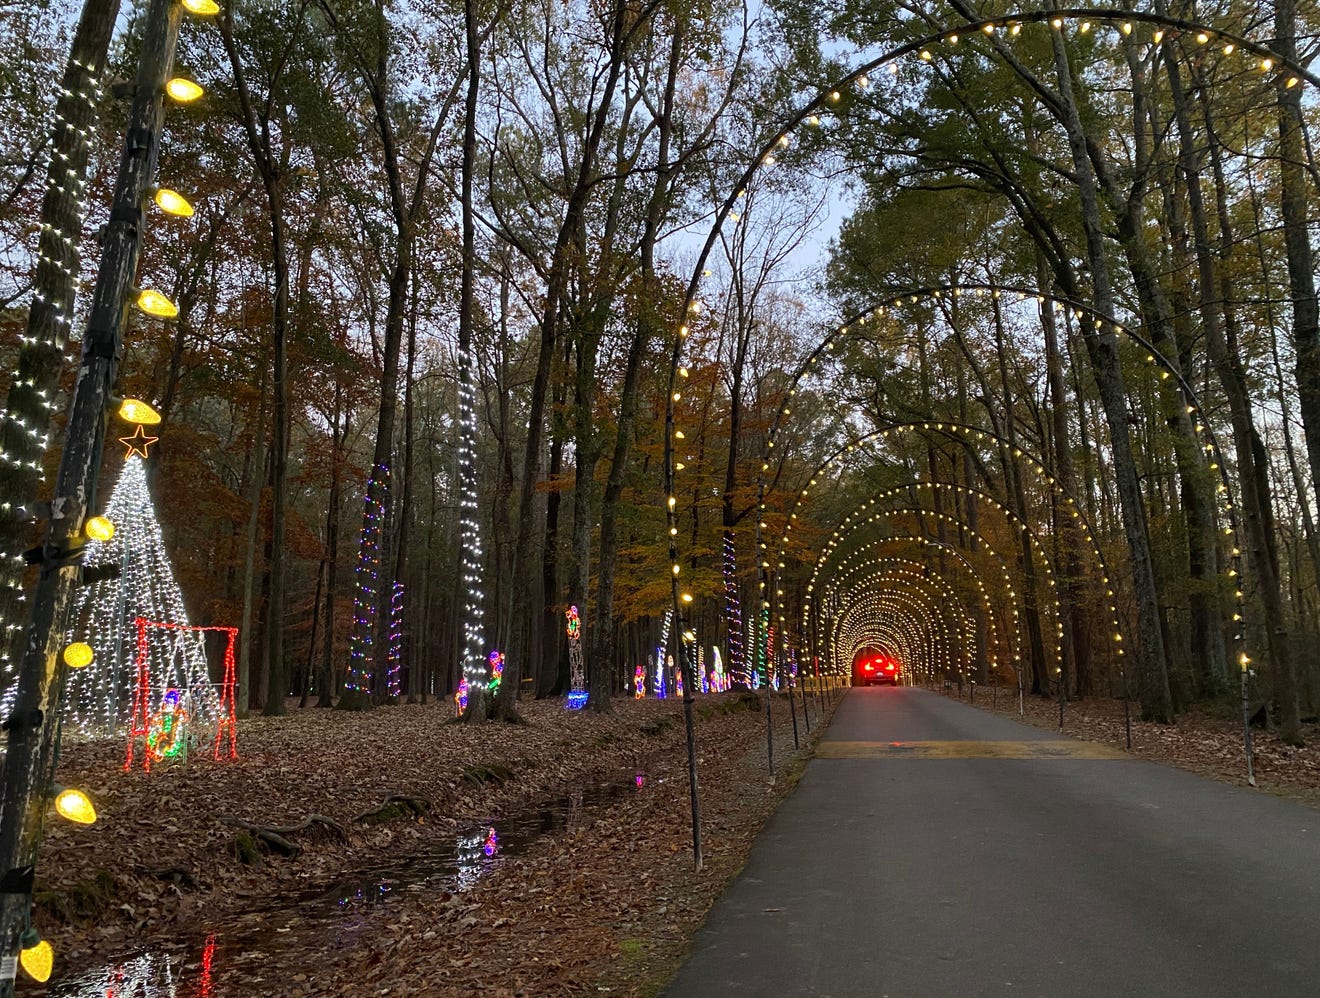 Christmas lights in the Fayetteville area